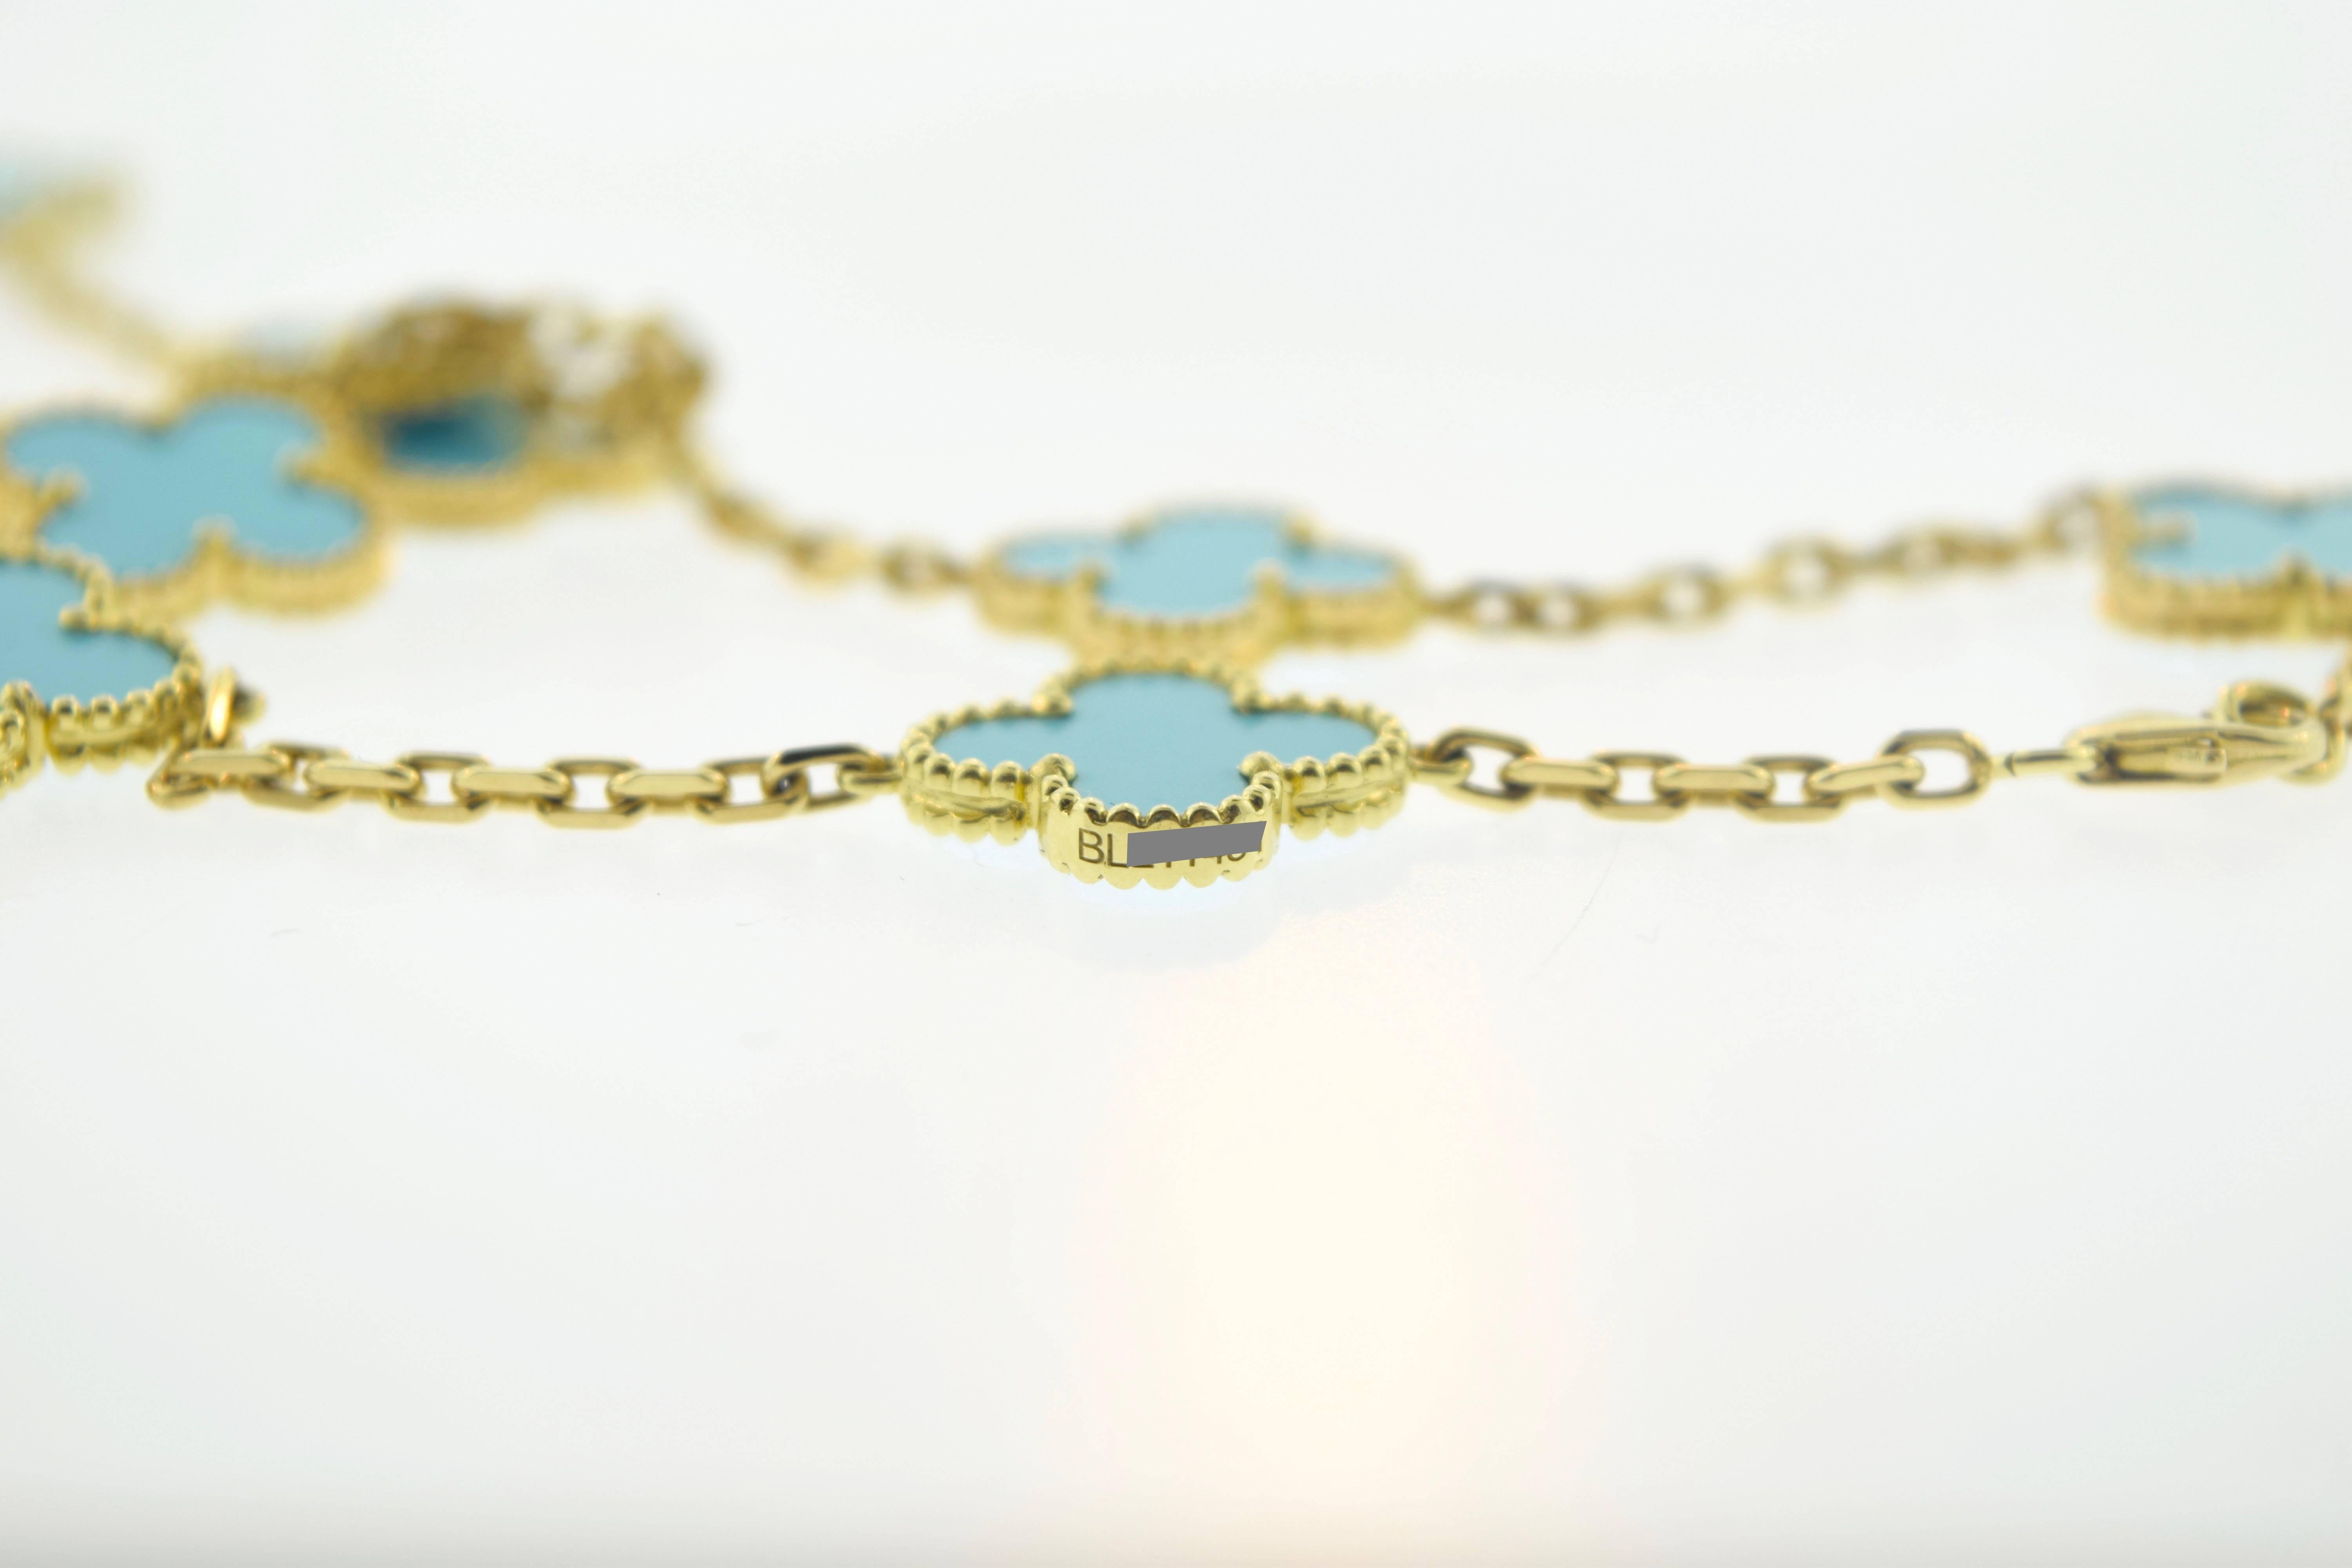 About the Item:
Faithful to the very first Alhambra jewel created in 1968, the Vintage Alhambra creations are distinguished by their unique, timeless elegance.
The Turquoise stones that Van Cleef & Arpels utilizes are very rare to come across;